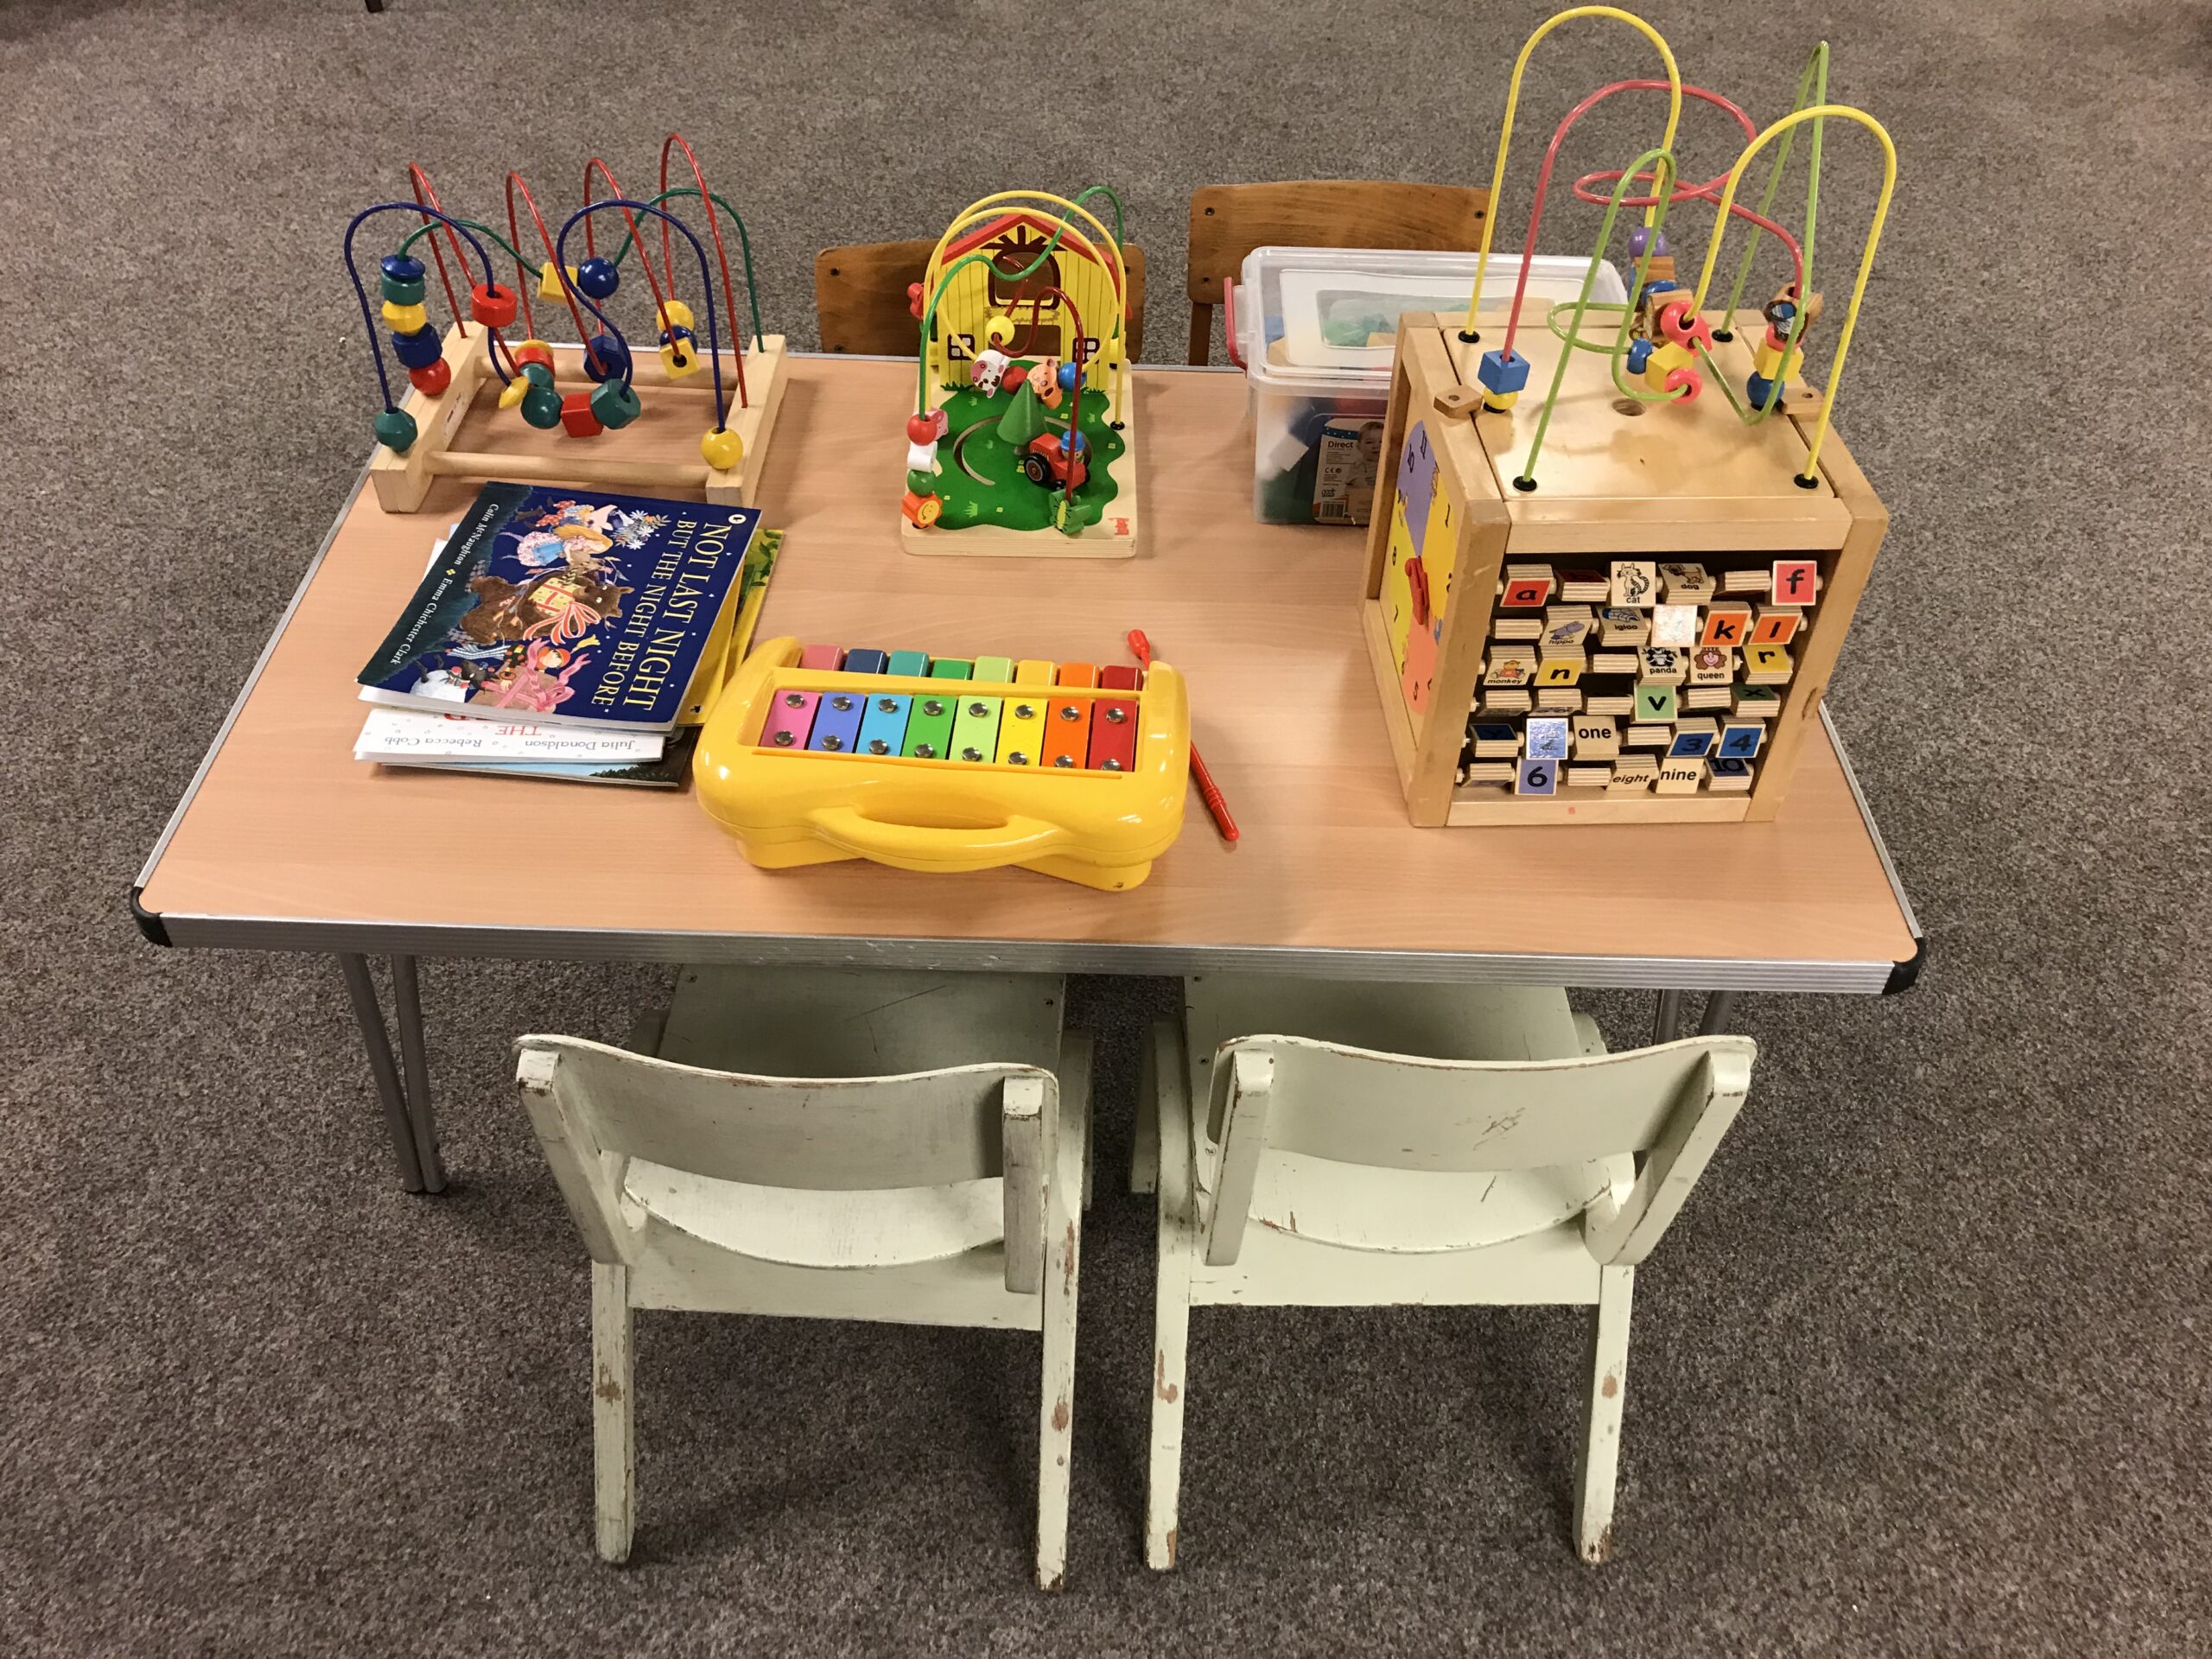 Children's table with toys and seats around